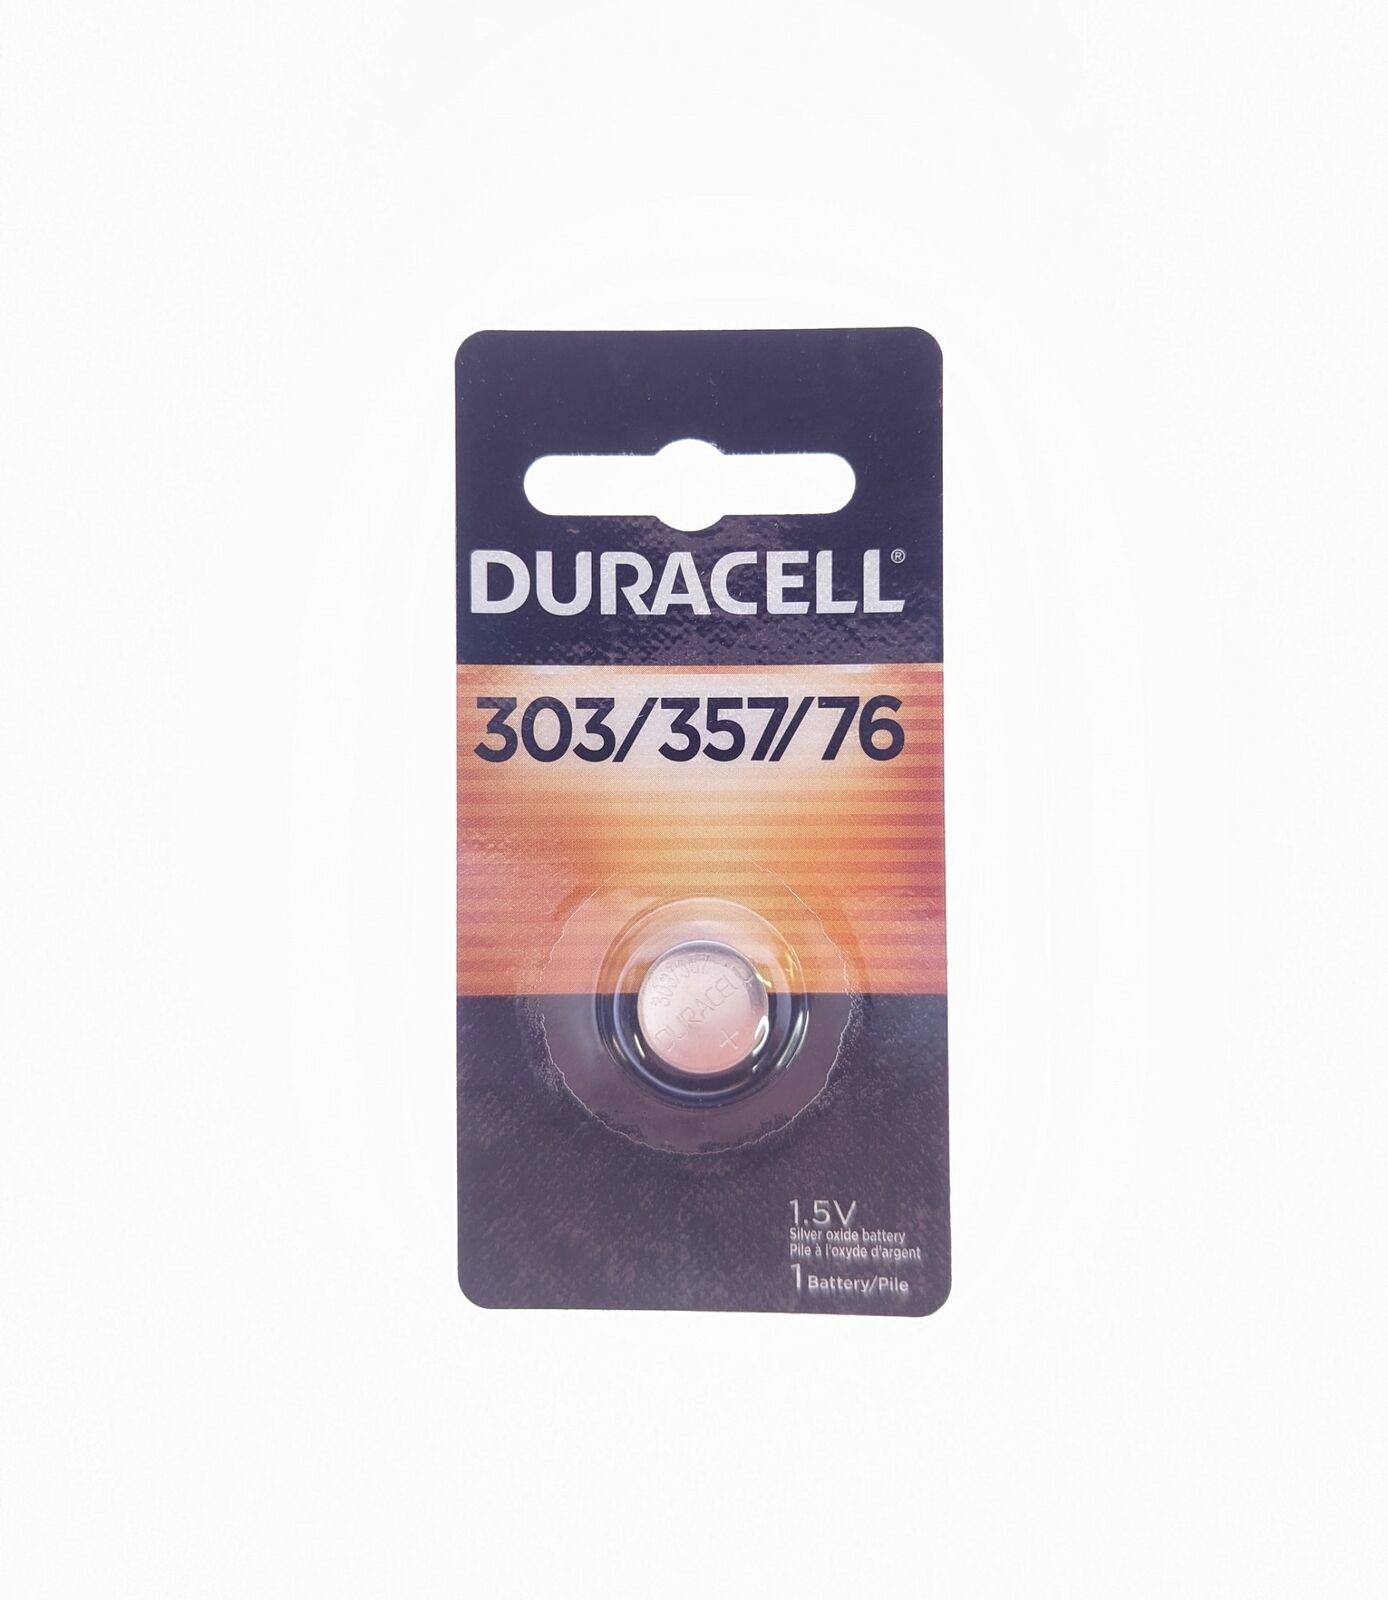 Duracell 303/357/76 Silver Oxide Button Batteries 1 5 20 40 100 Value Pack Lot